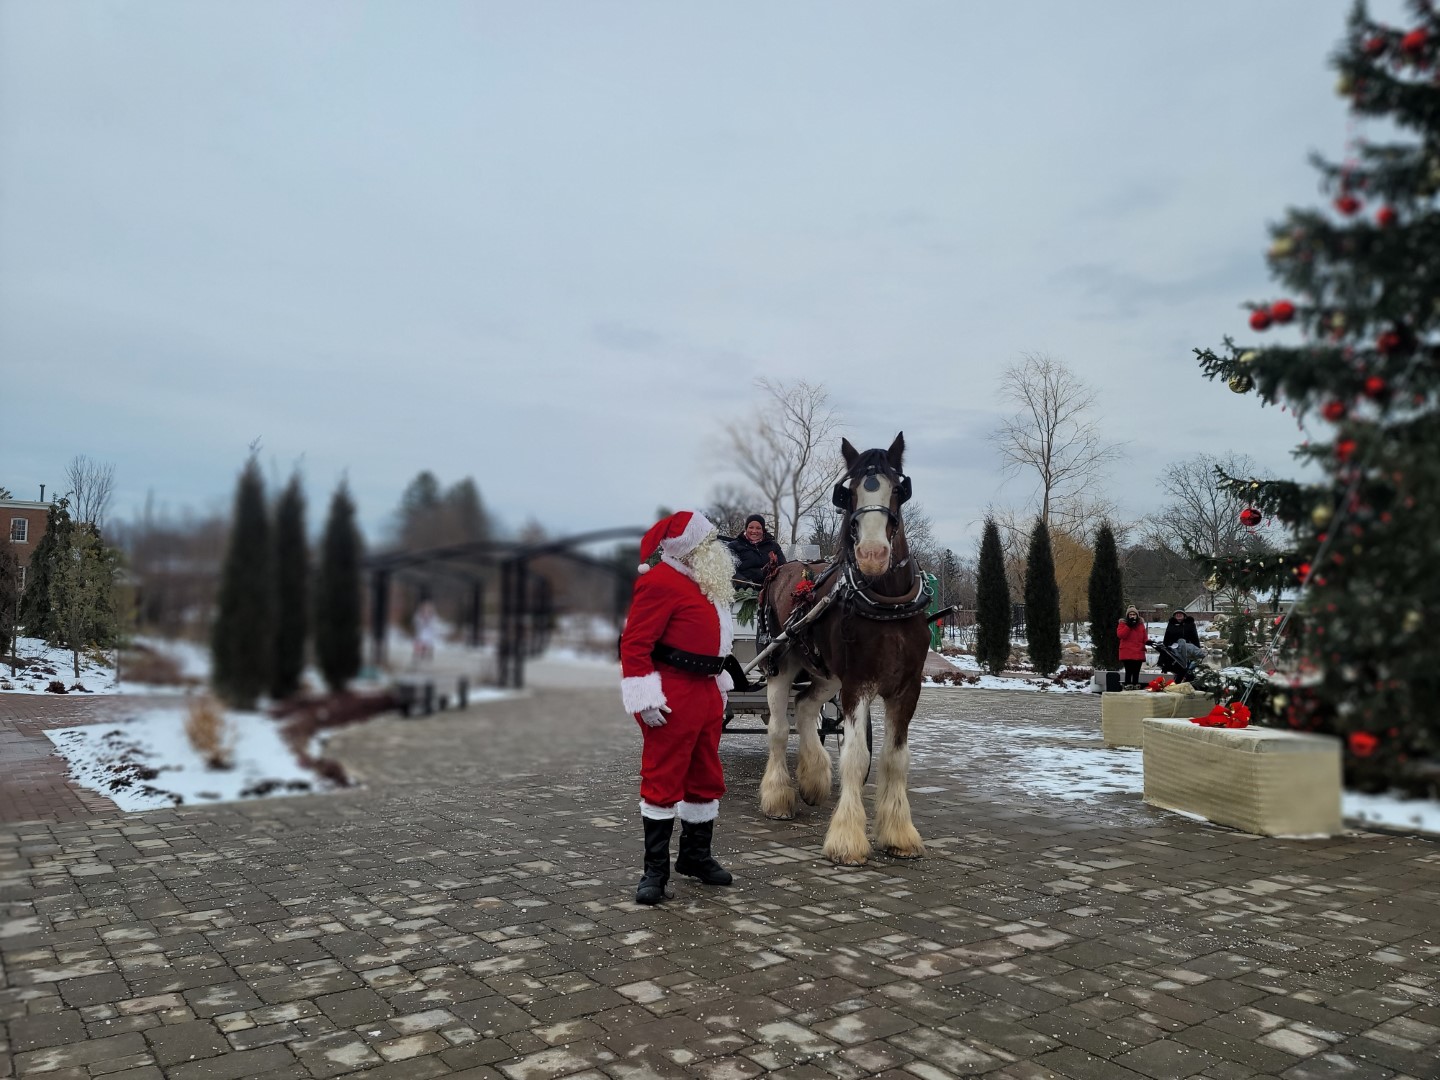 santa with horse carriage